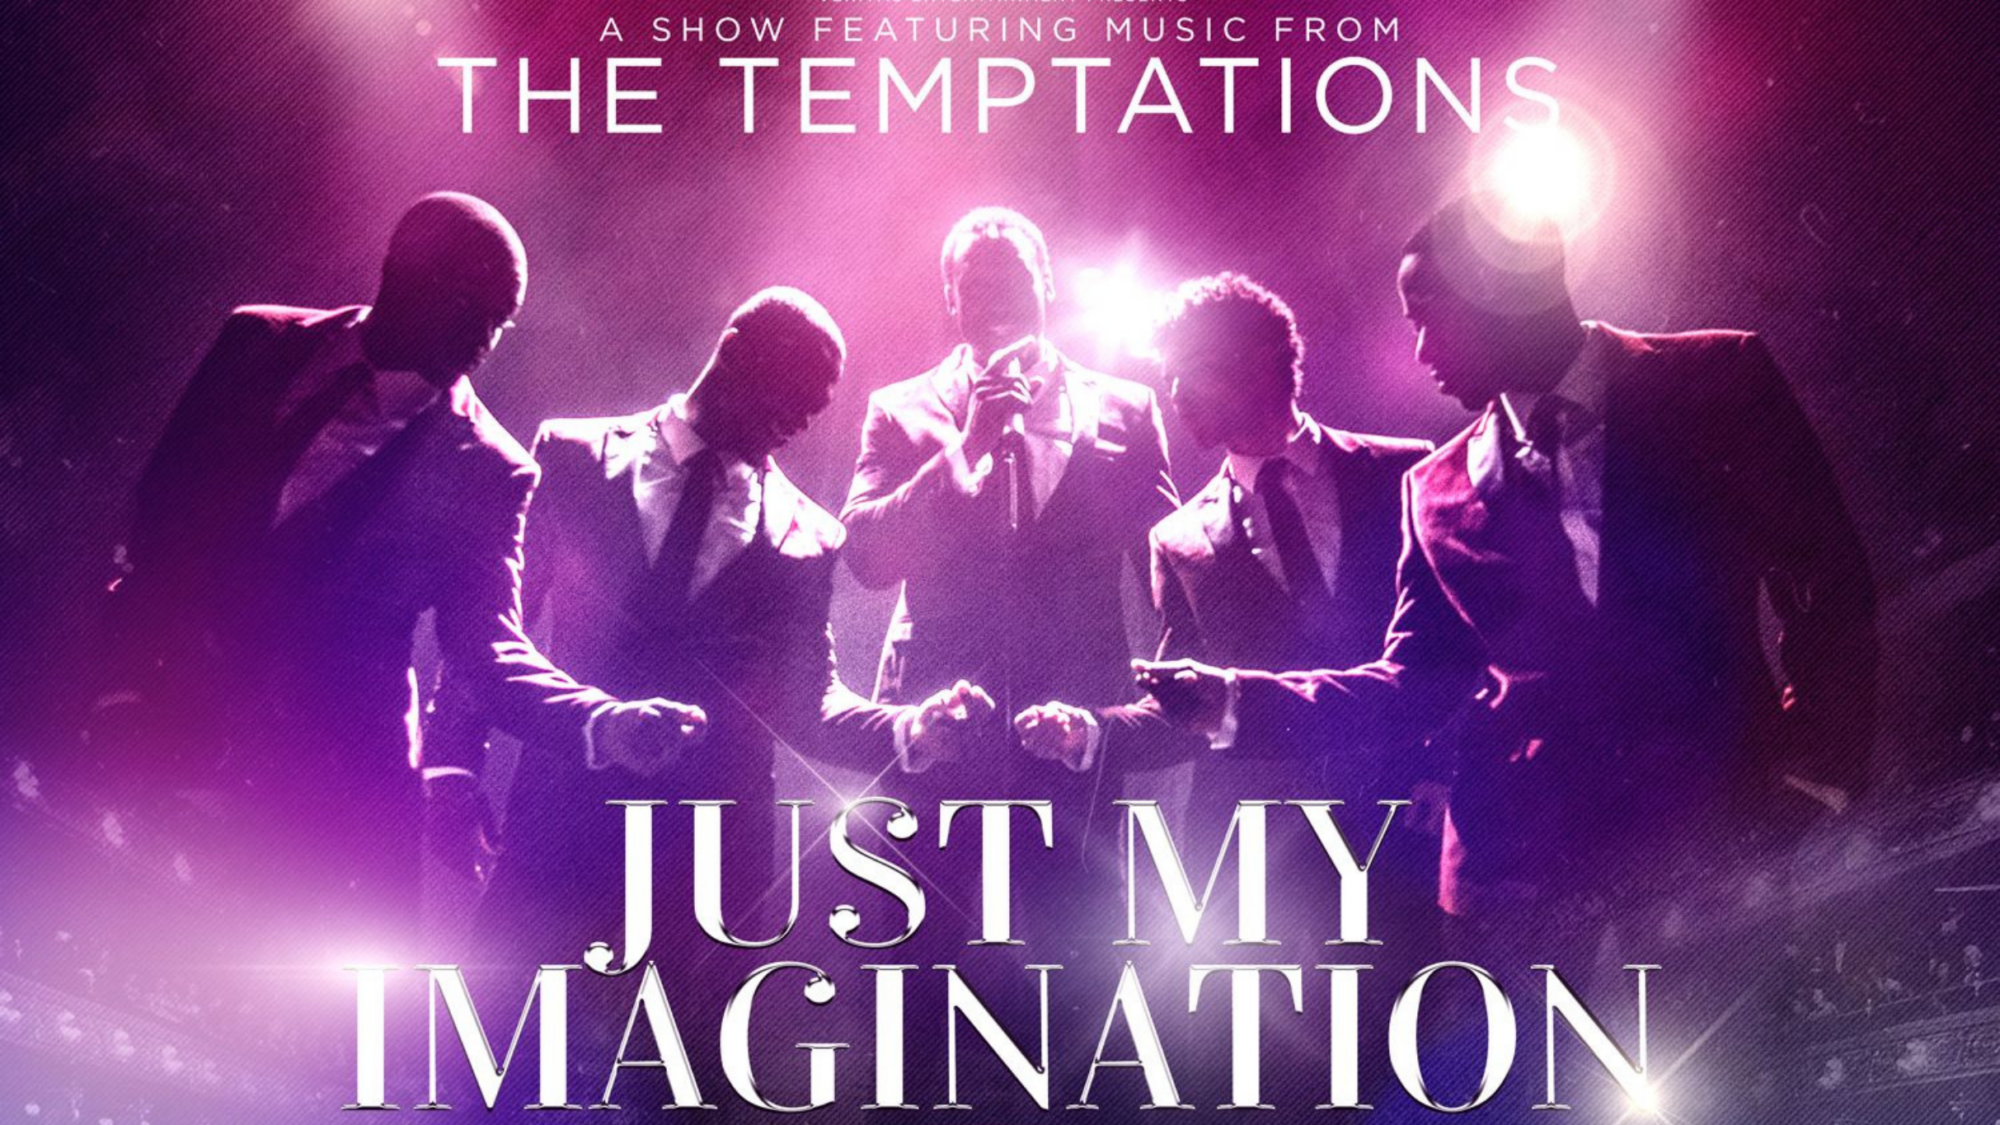 Image name Just My Imagination The Music of the Temptations at Sheffield City Hall Oval Hall Sheffield the 14 image from the post Just My Imagination - The Music of the Temptations at Sheffield City Hall Oval Hall, Sheffield in Yorkshire.com.